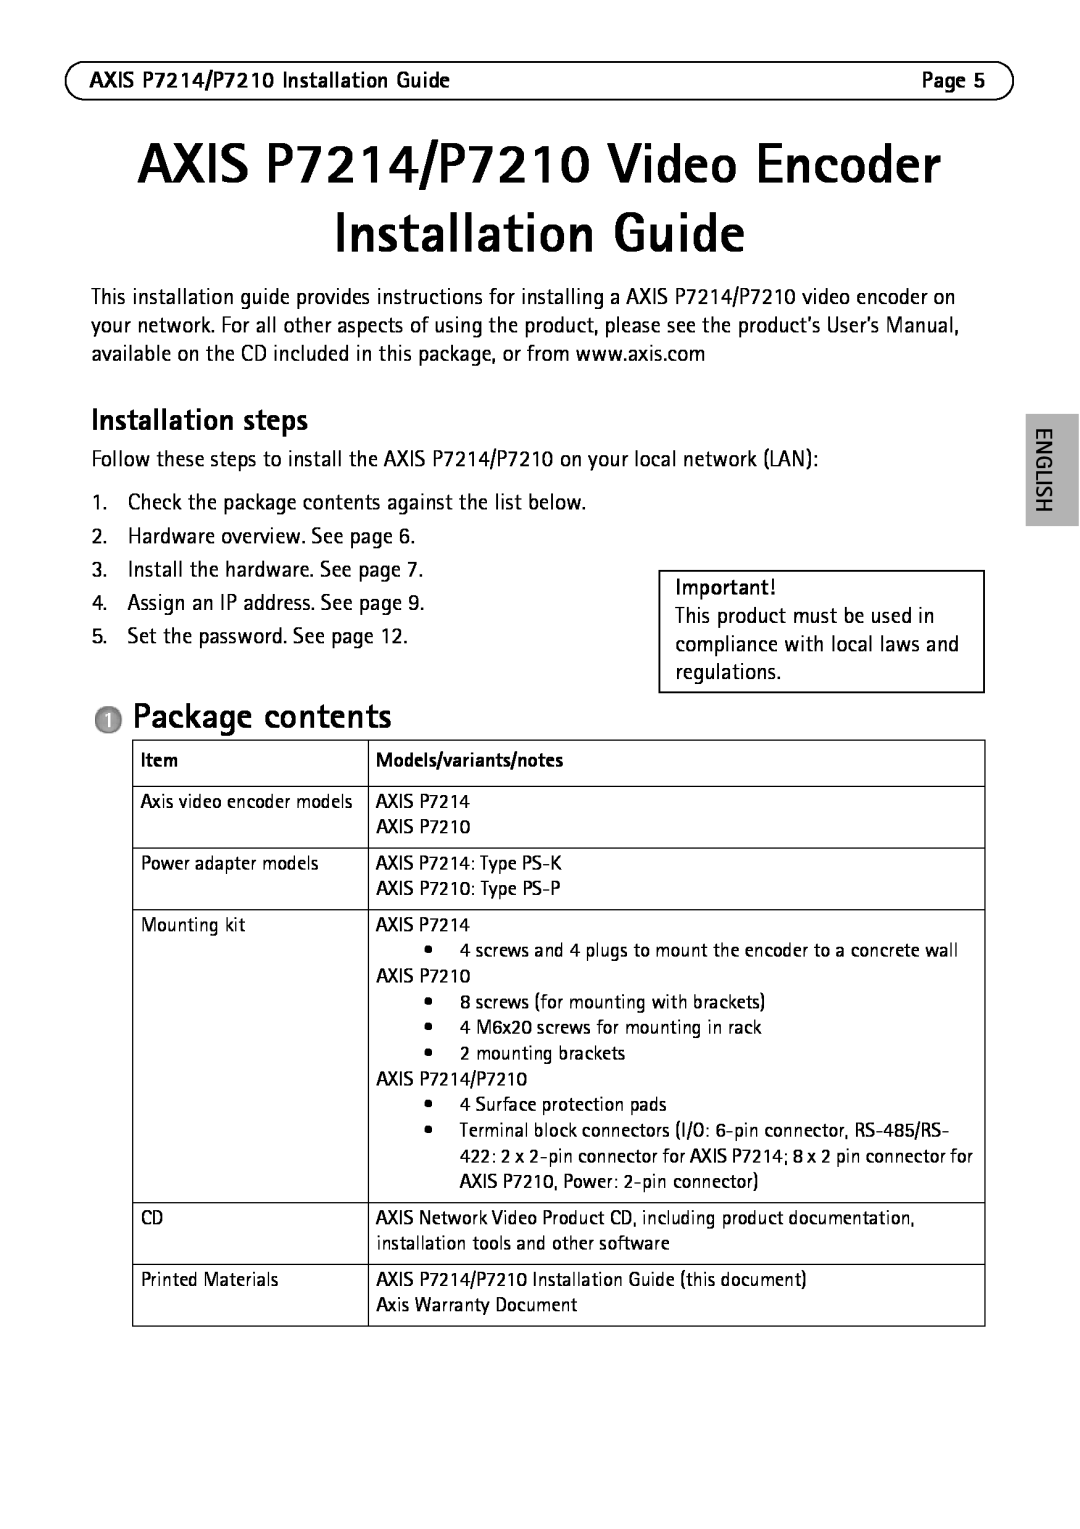 Axis Communications manual AXIS P7214/P7210 Video Encoder Installation Guide, Package contents, Installation steps 